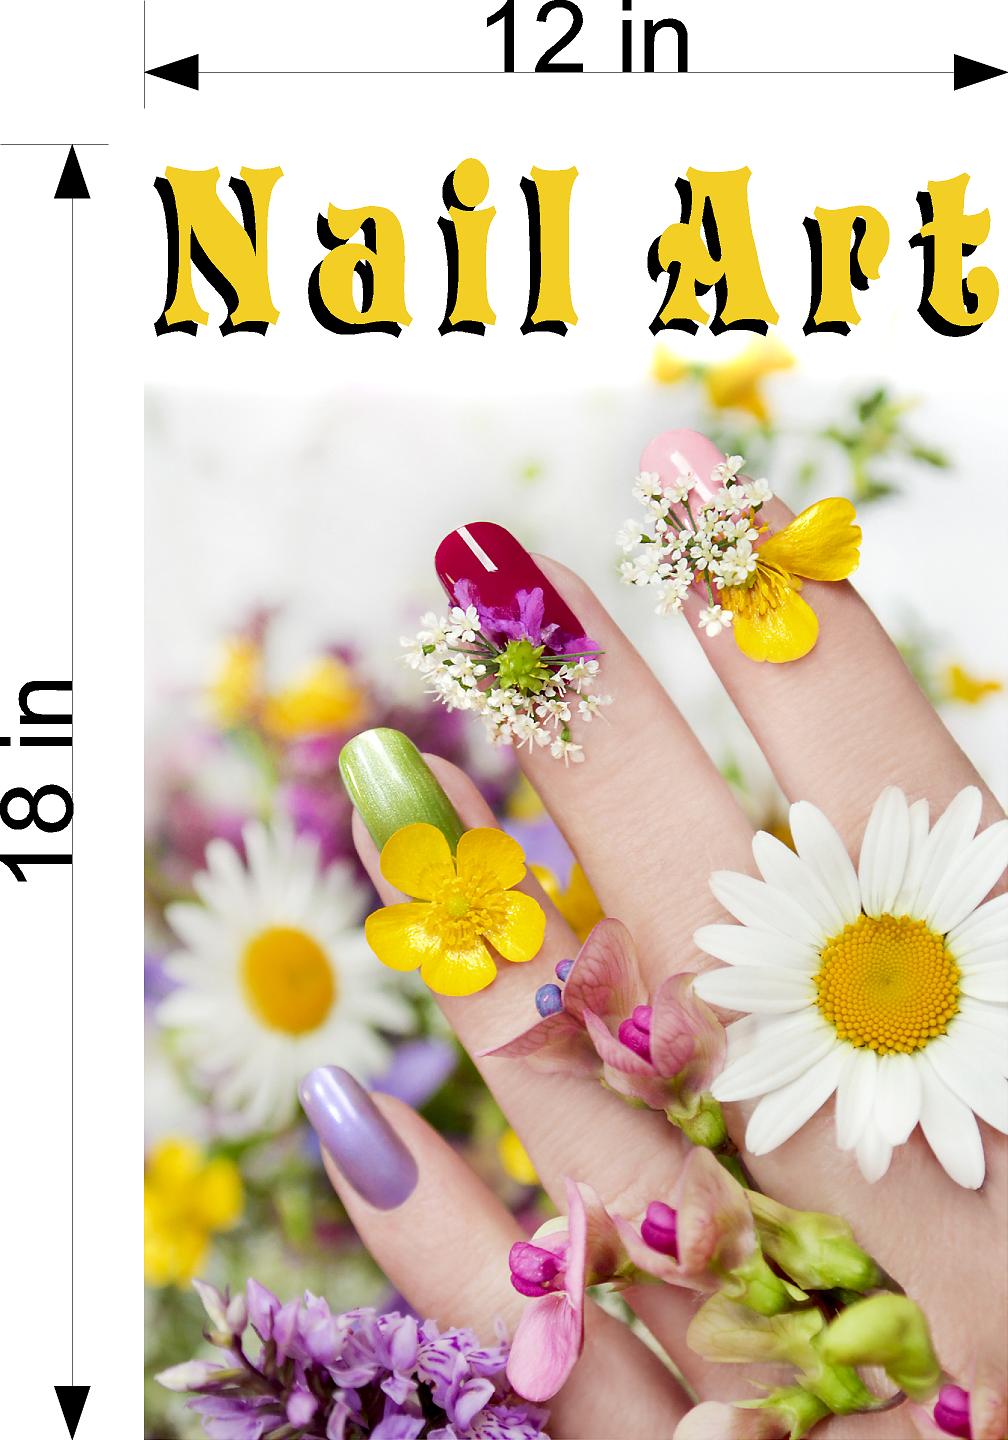 Nail Art 05 Wallpaper Poster Decal with Adhesive Backing Wall Sticker Decor Indoors Interior Sign Vertical